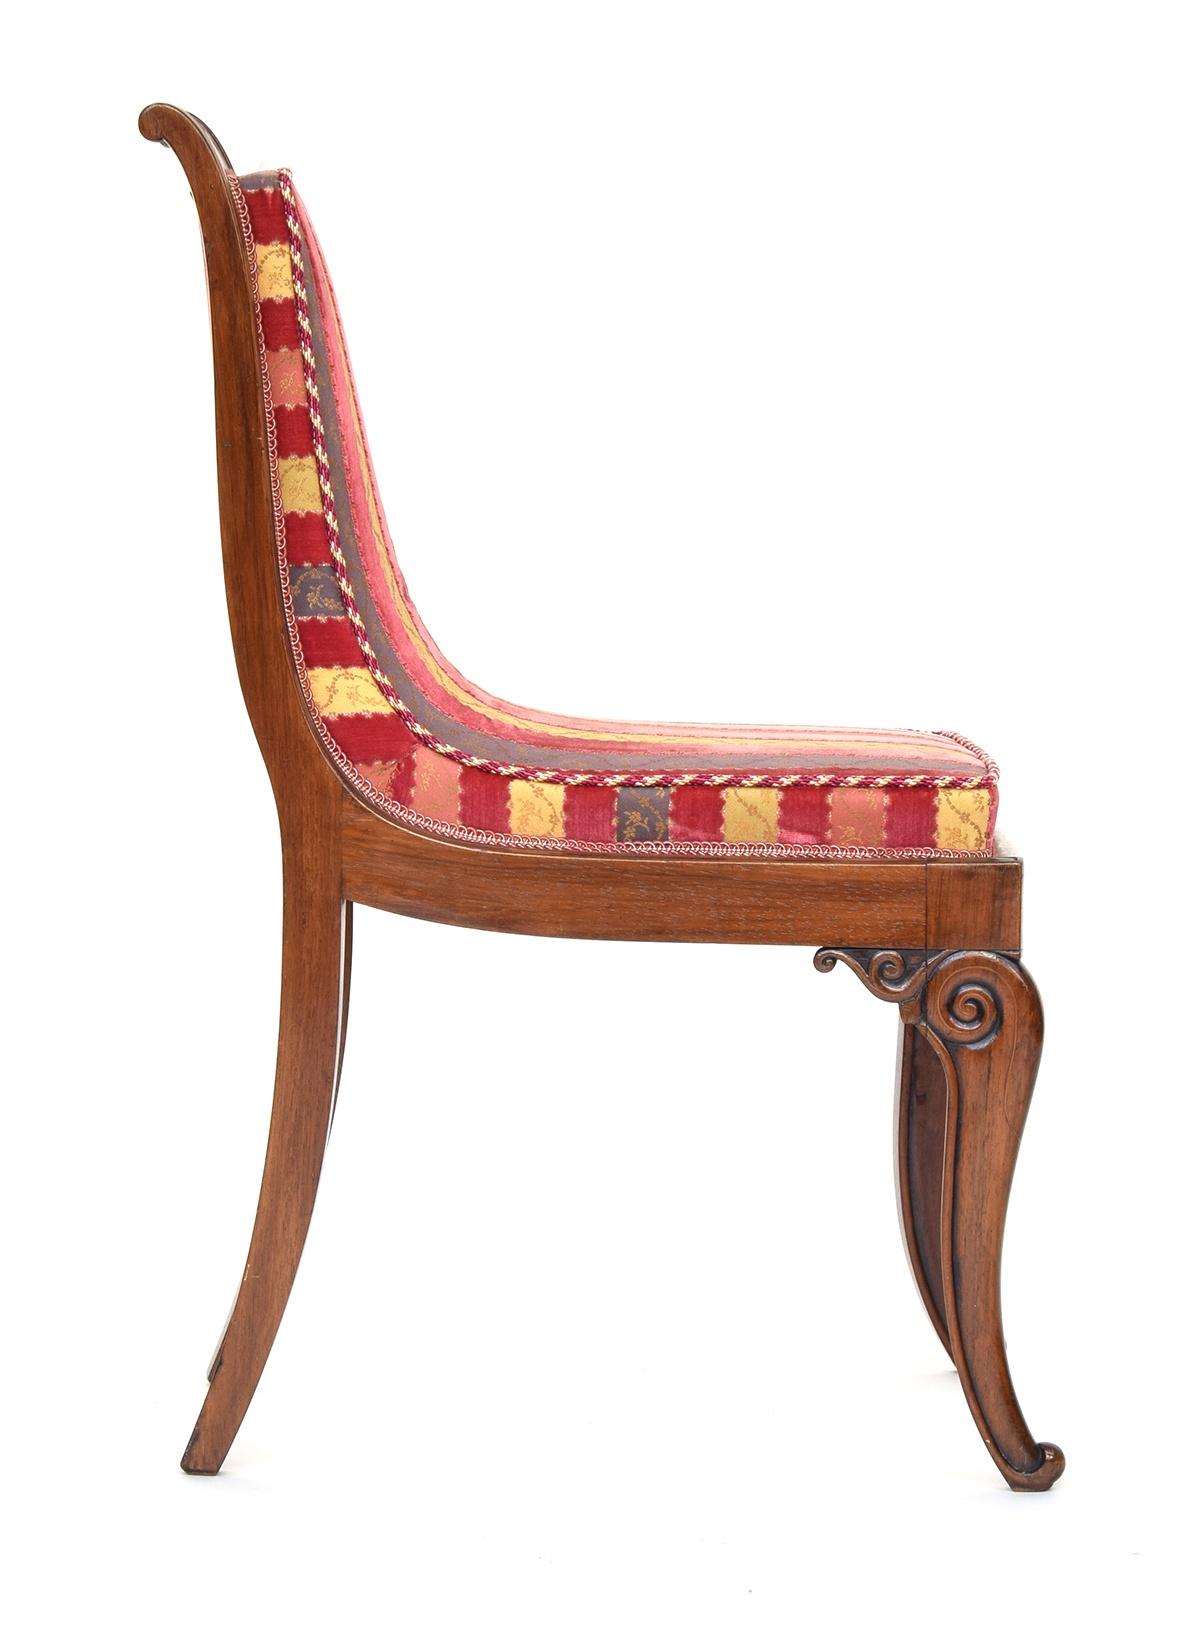 A set of six Louis Philippe mahogany and marquetry inlaid side chairs, circa 1840, upholstered in - Image 3 of 5